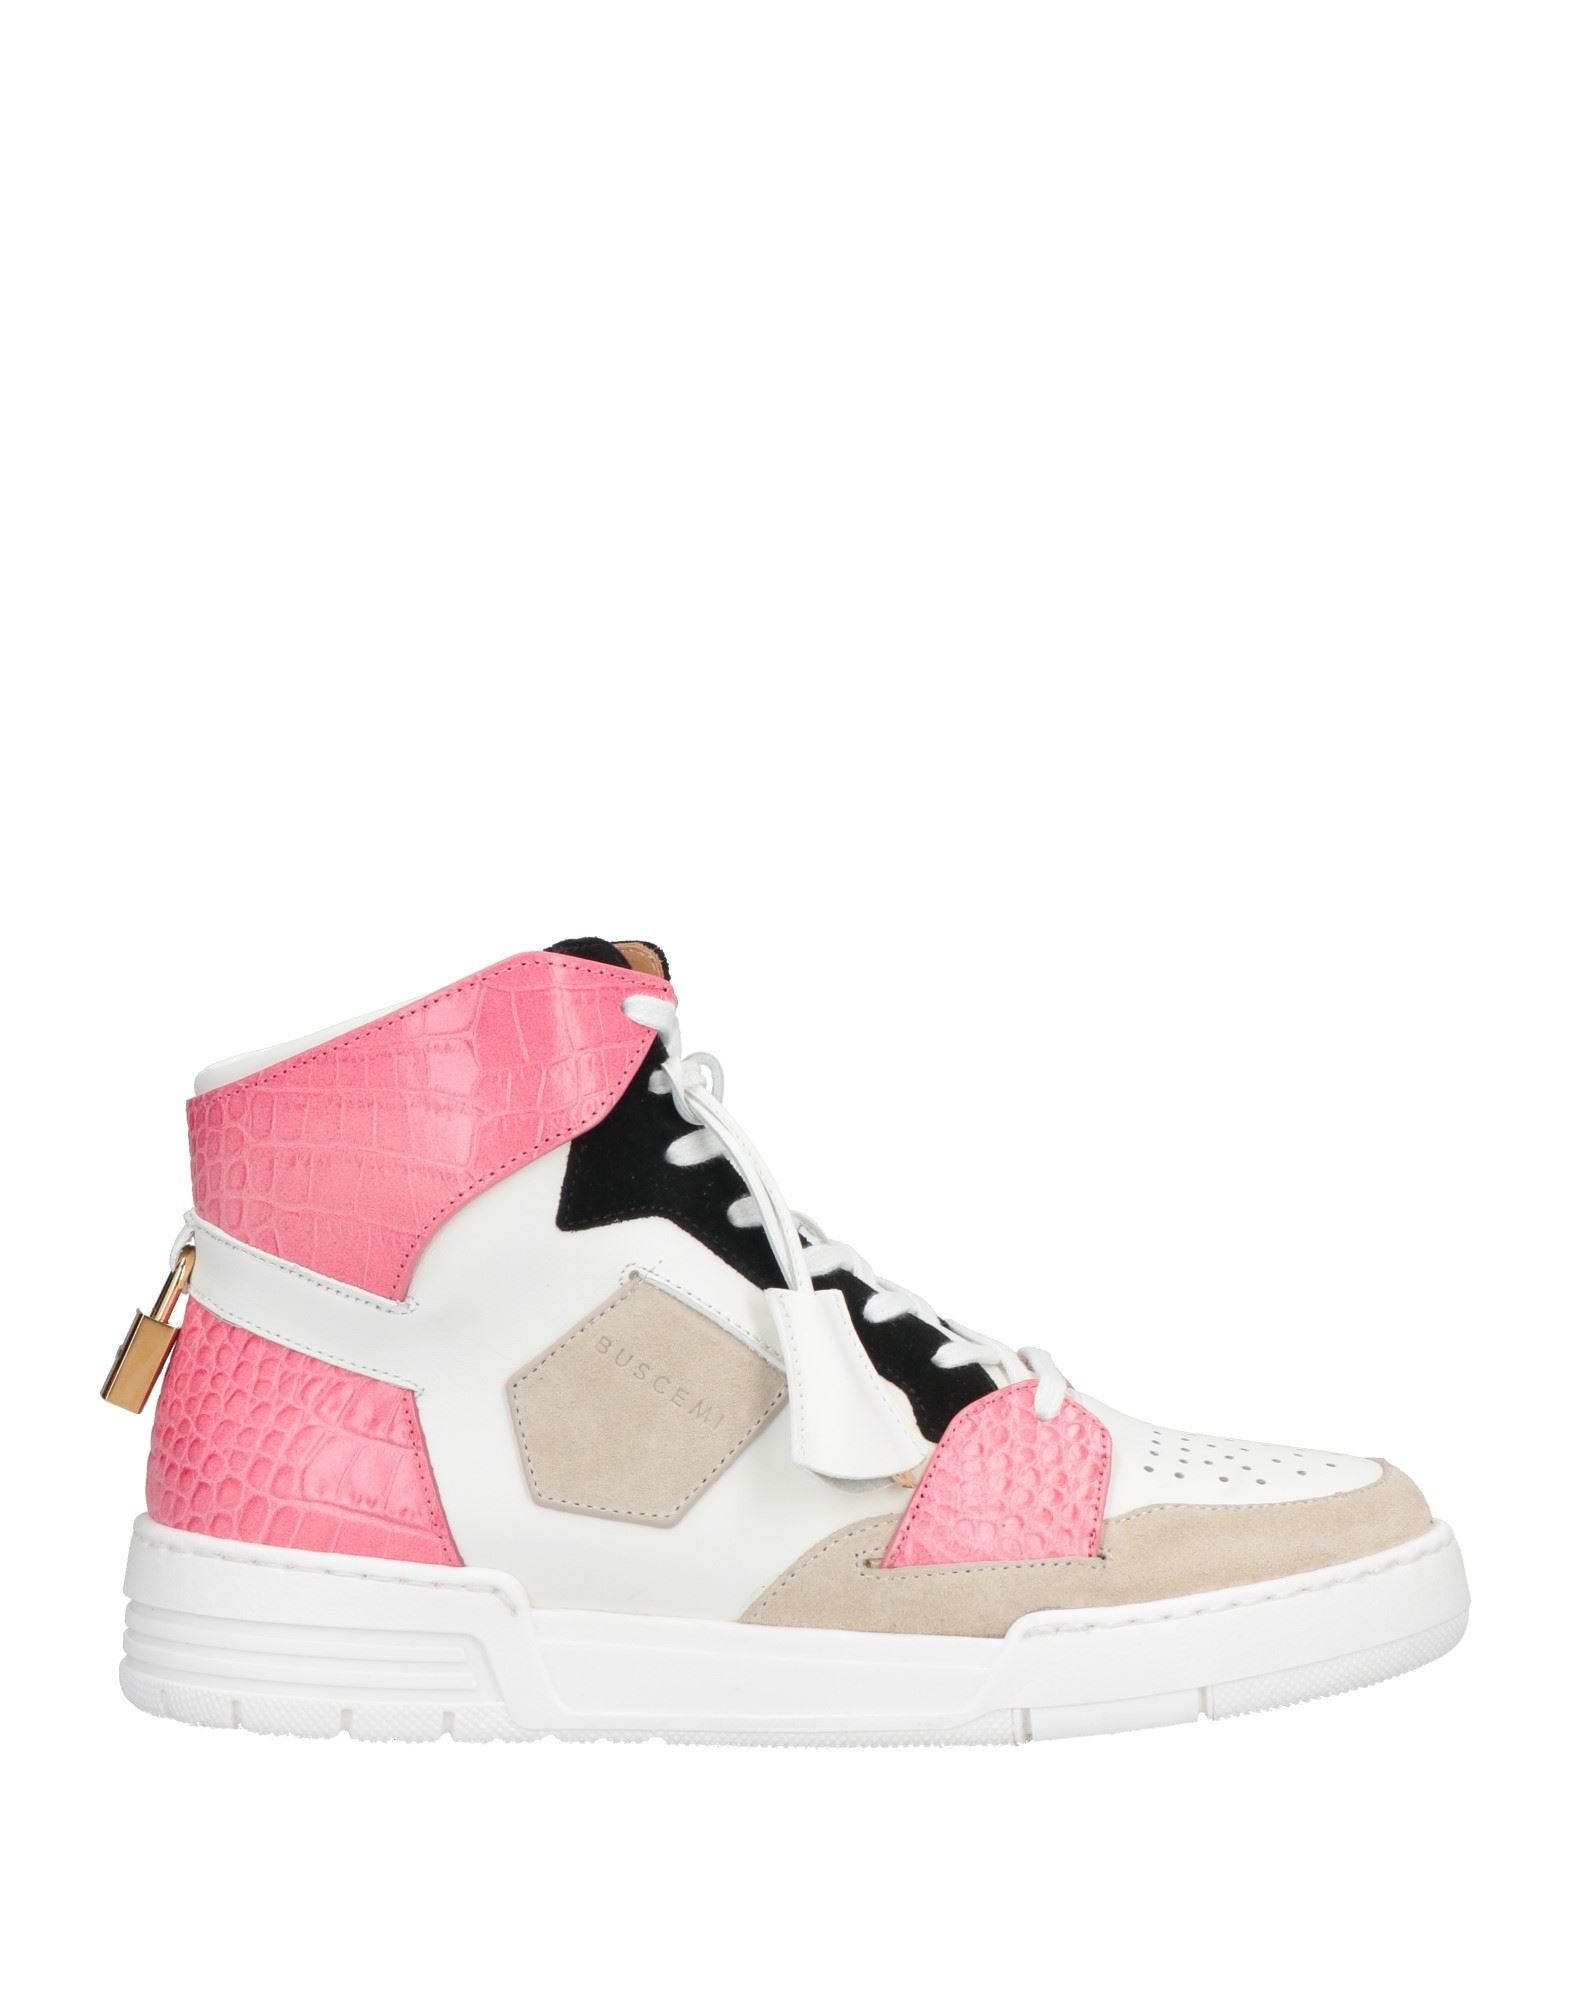 Buscemi Sneakers In Pink